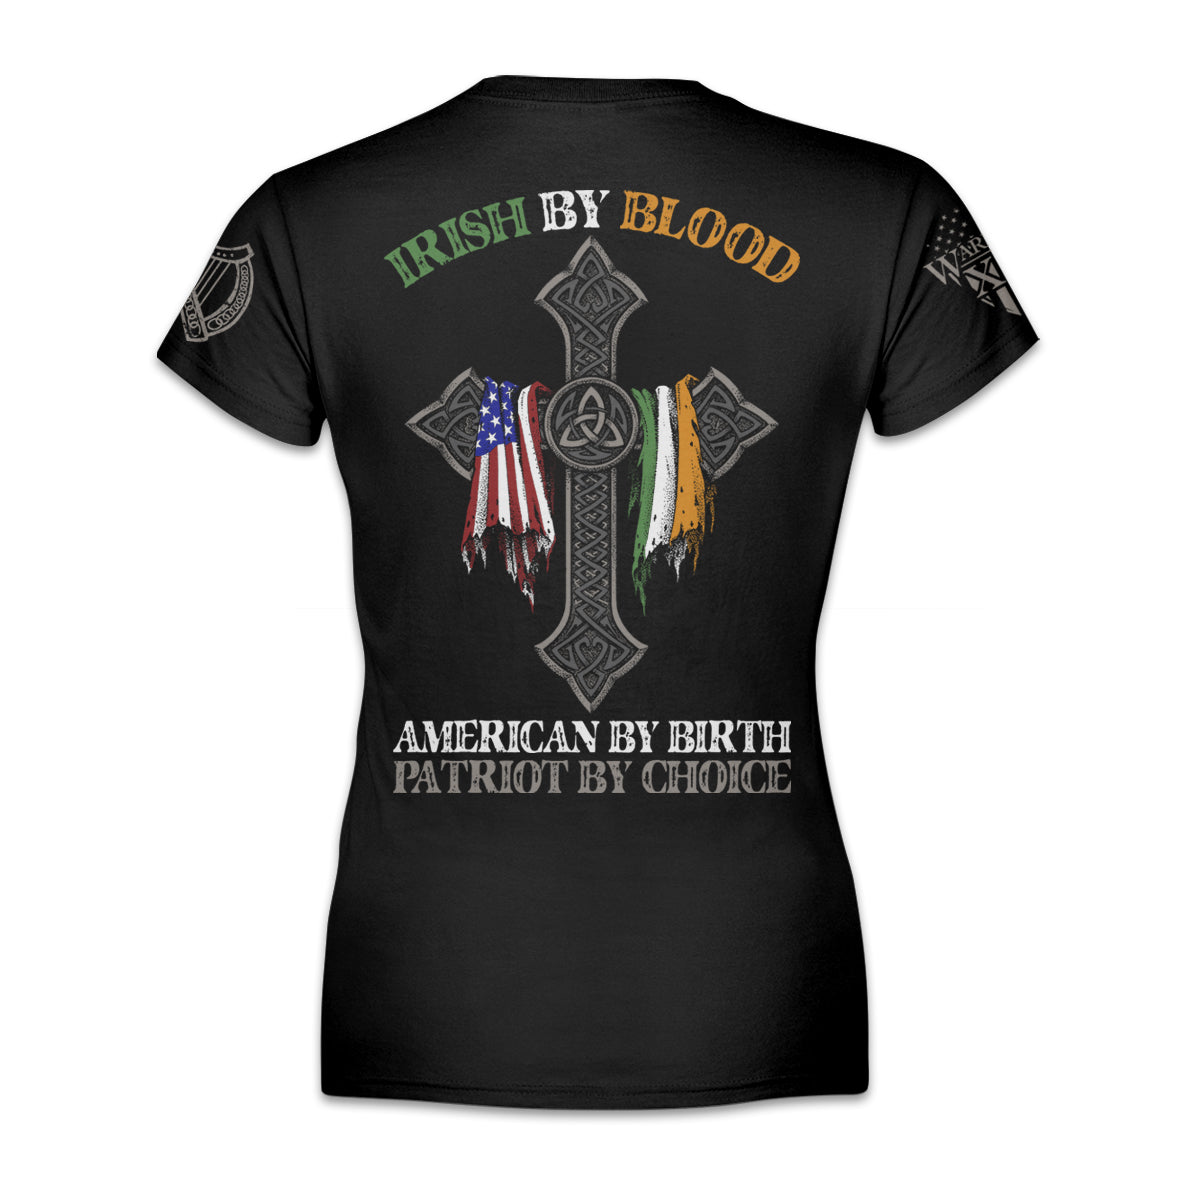 A black women's relaxed fit shirt with the words "Irish by blood, American by birth, patriot by choice" with a cross holding an American and Irish flag printed on the back of the shirt.